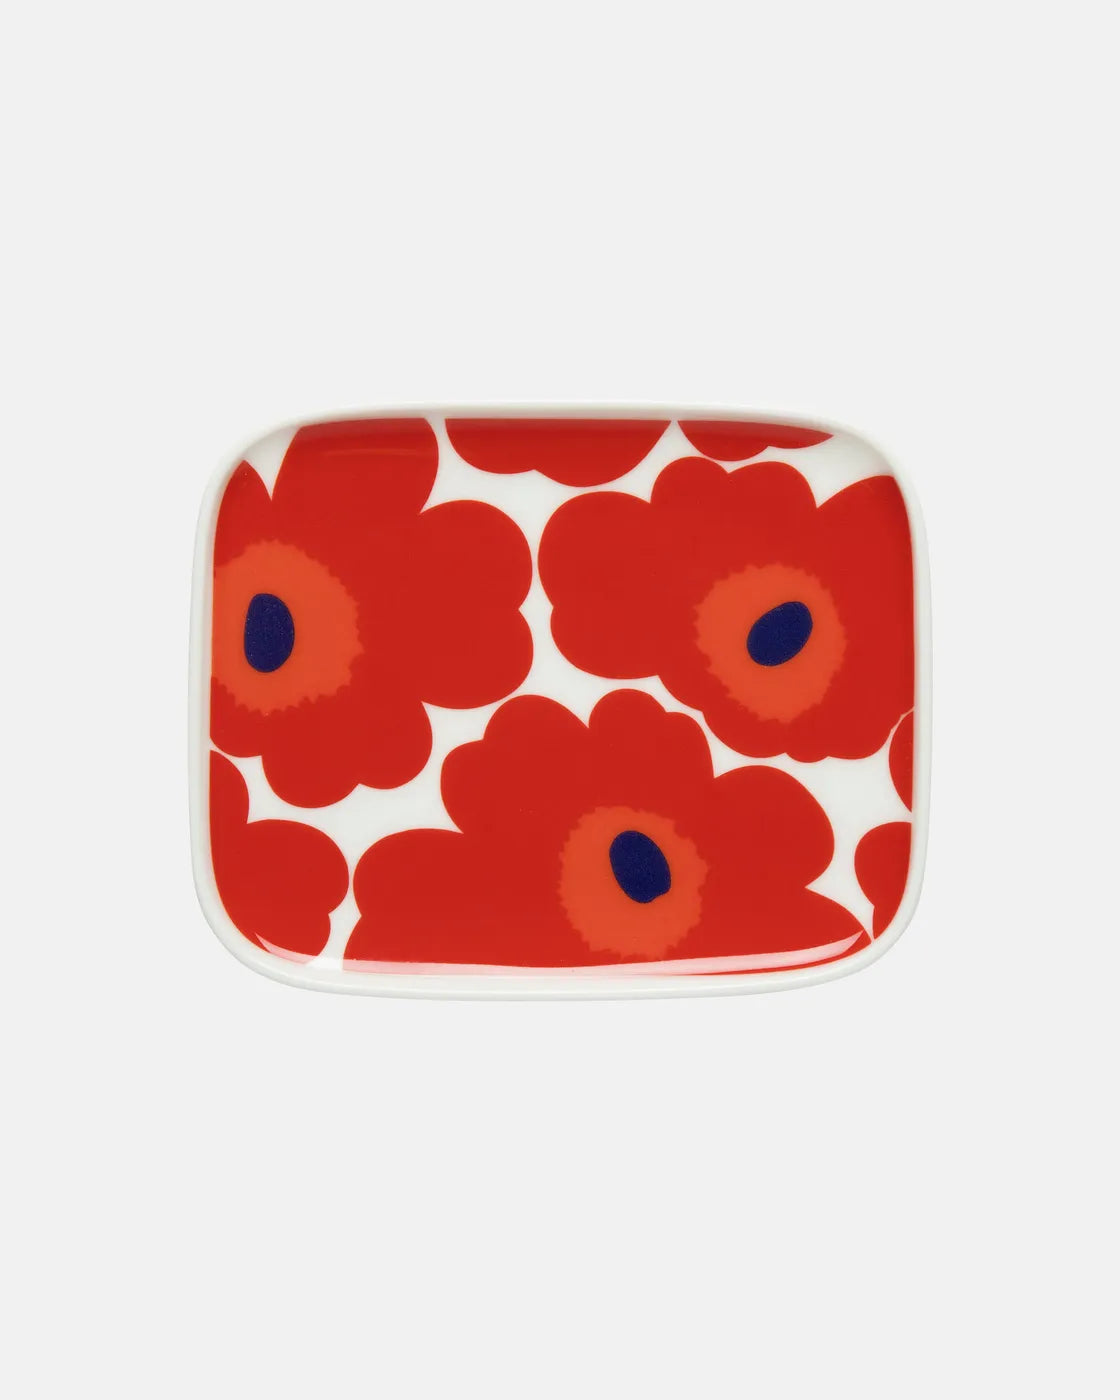 Unikko Plate/ 15x12cm/ Red & Blue/Small Plate